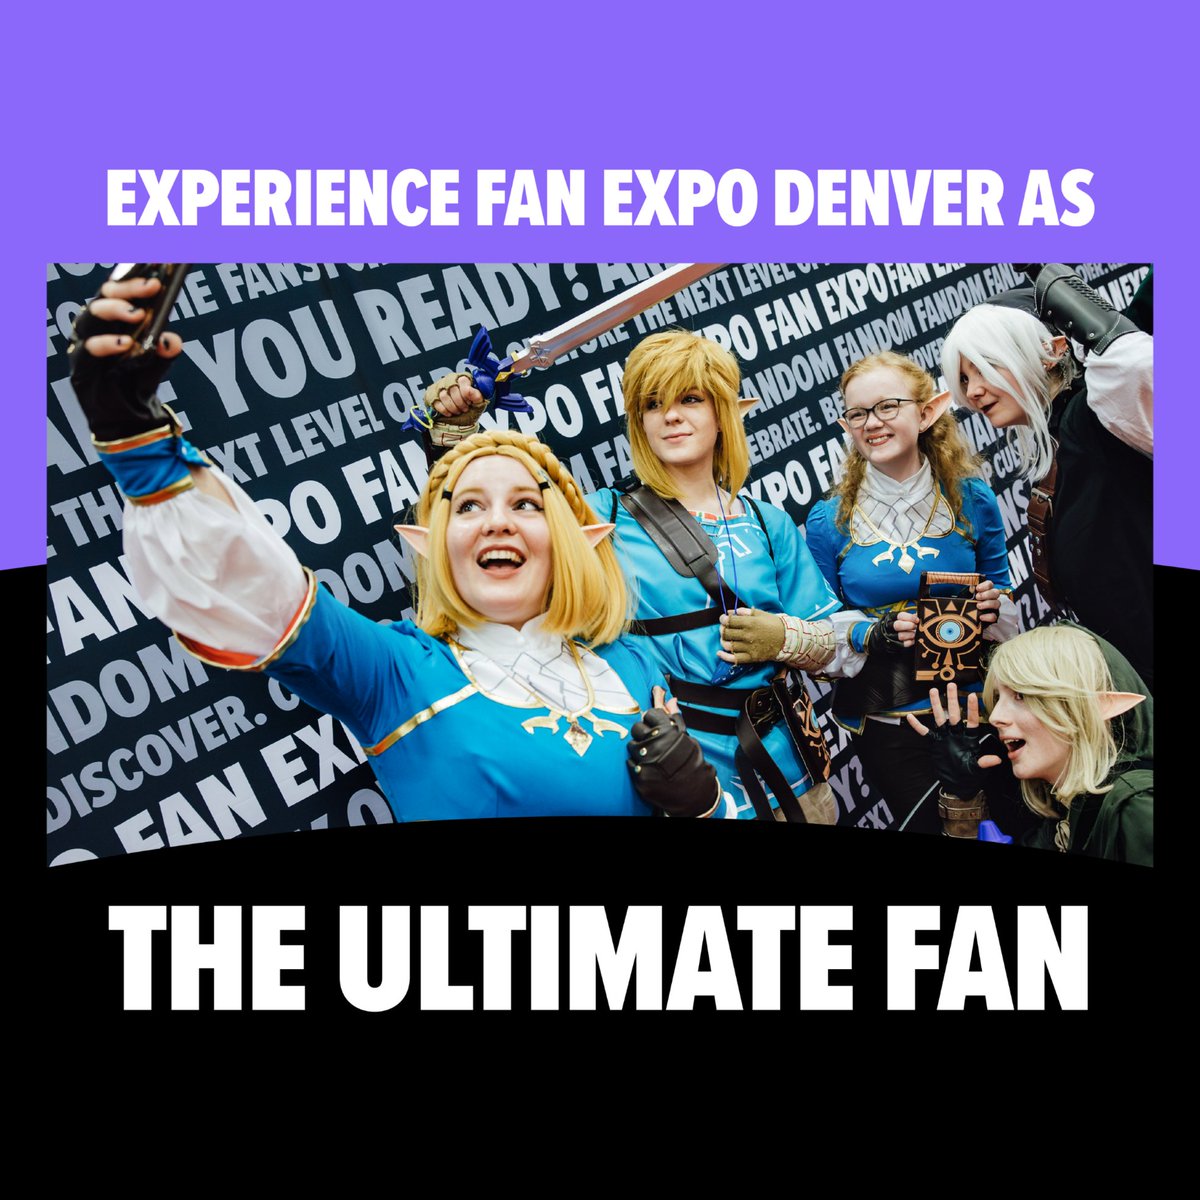 Are you ready for FAN EXPO Denver? Make the ultimate fandom weekend even better by upgrading to or buying an Ultimate Fan Package. Check out all the perks here and grab yours soon - VIP Passes are already sold out. spr.ly/6017jrSyv